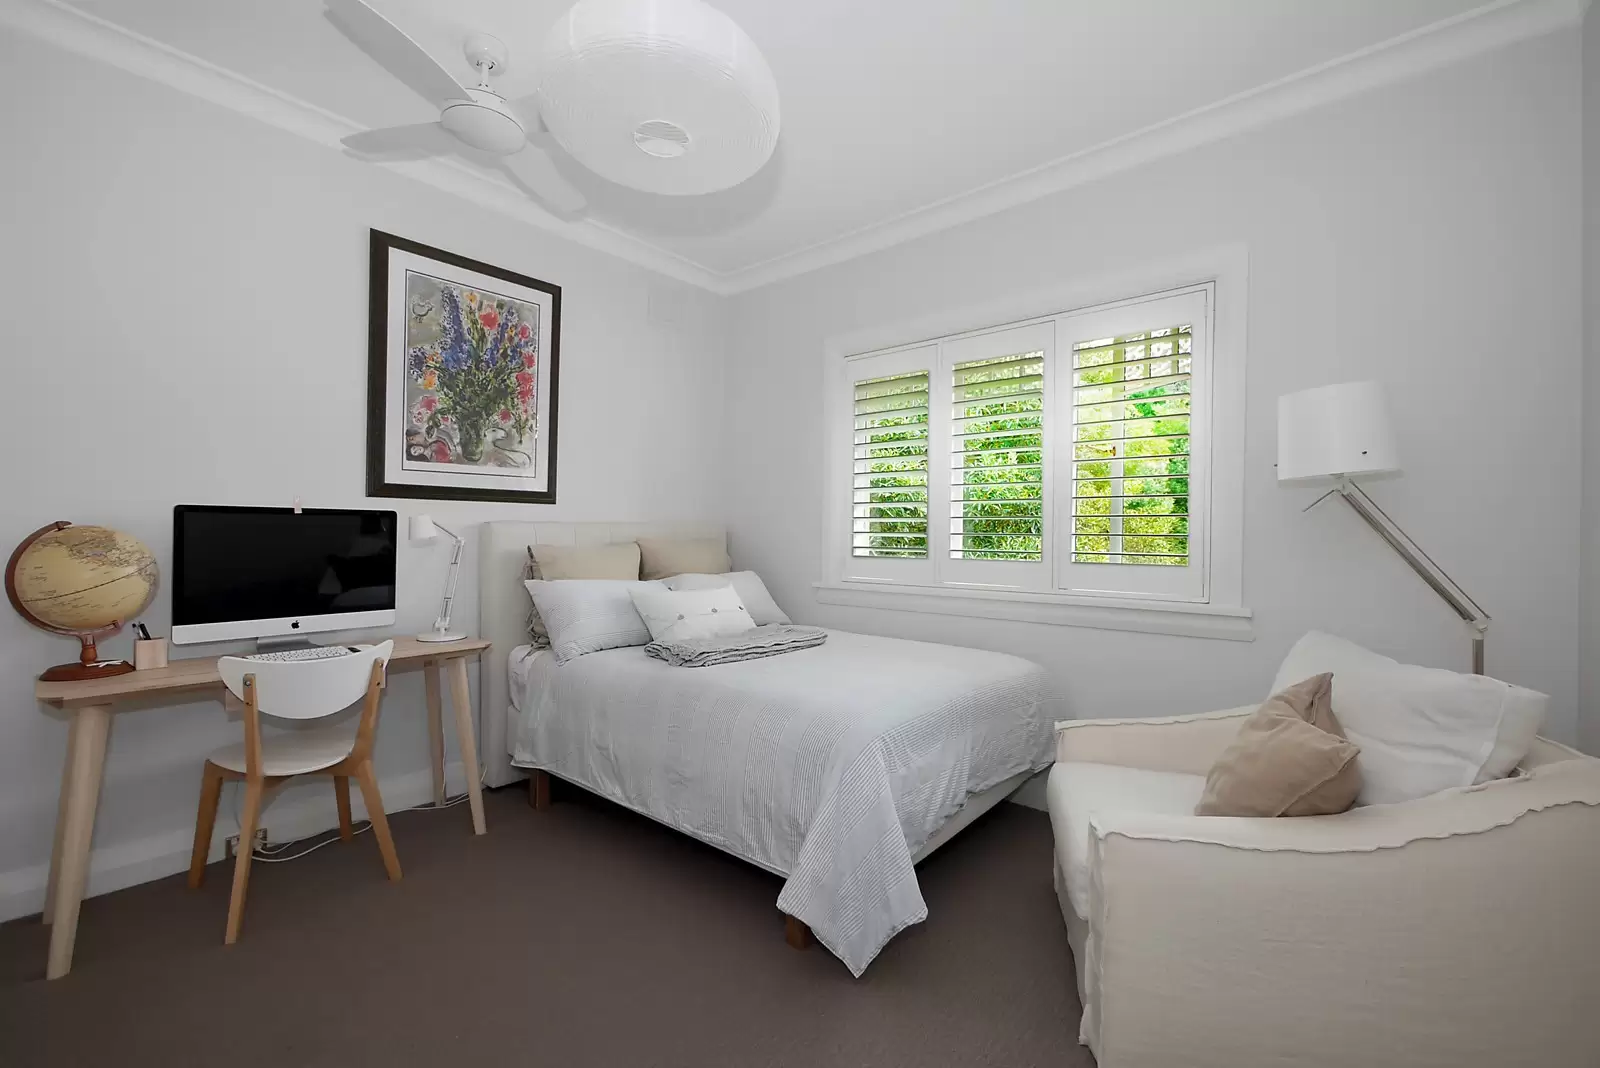 Photo #7: 6/106 Balfour Road, Bellevue Hill - Sold by Sydney Sotheby's International Realty